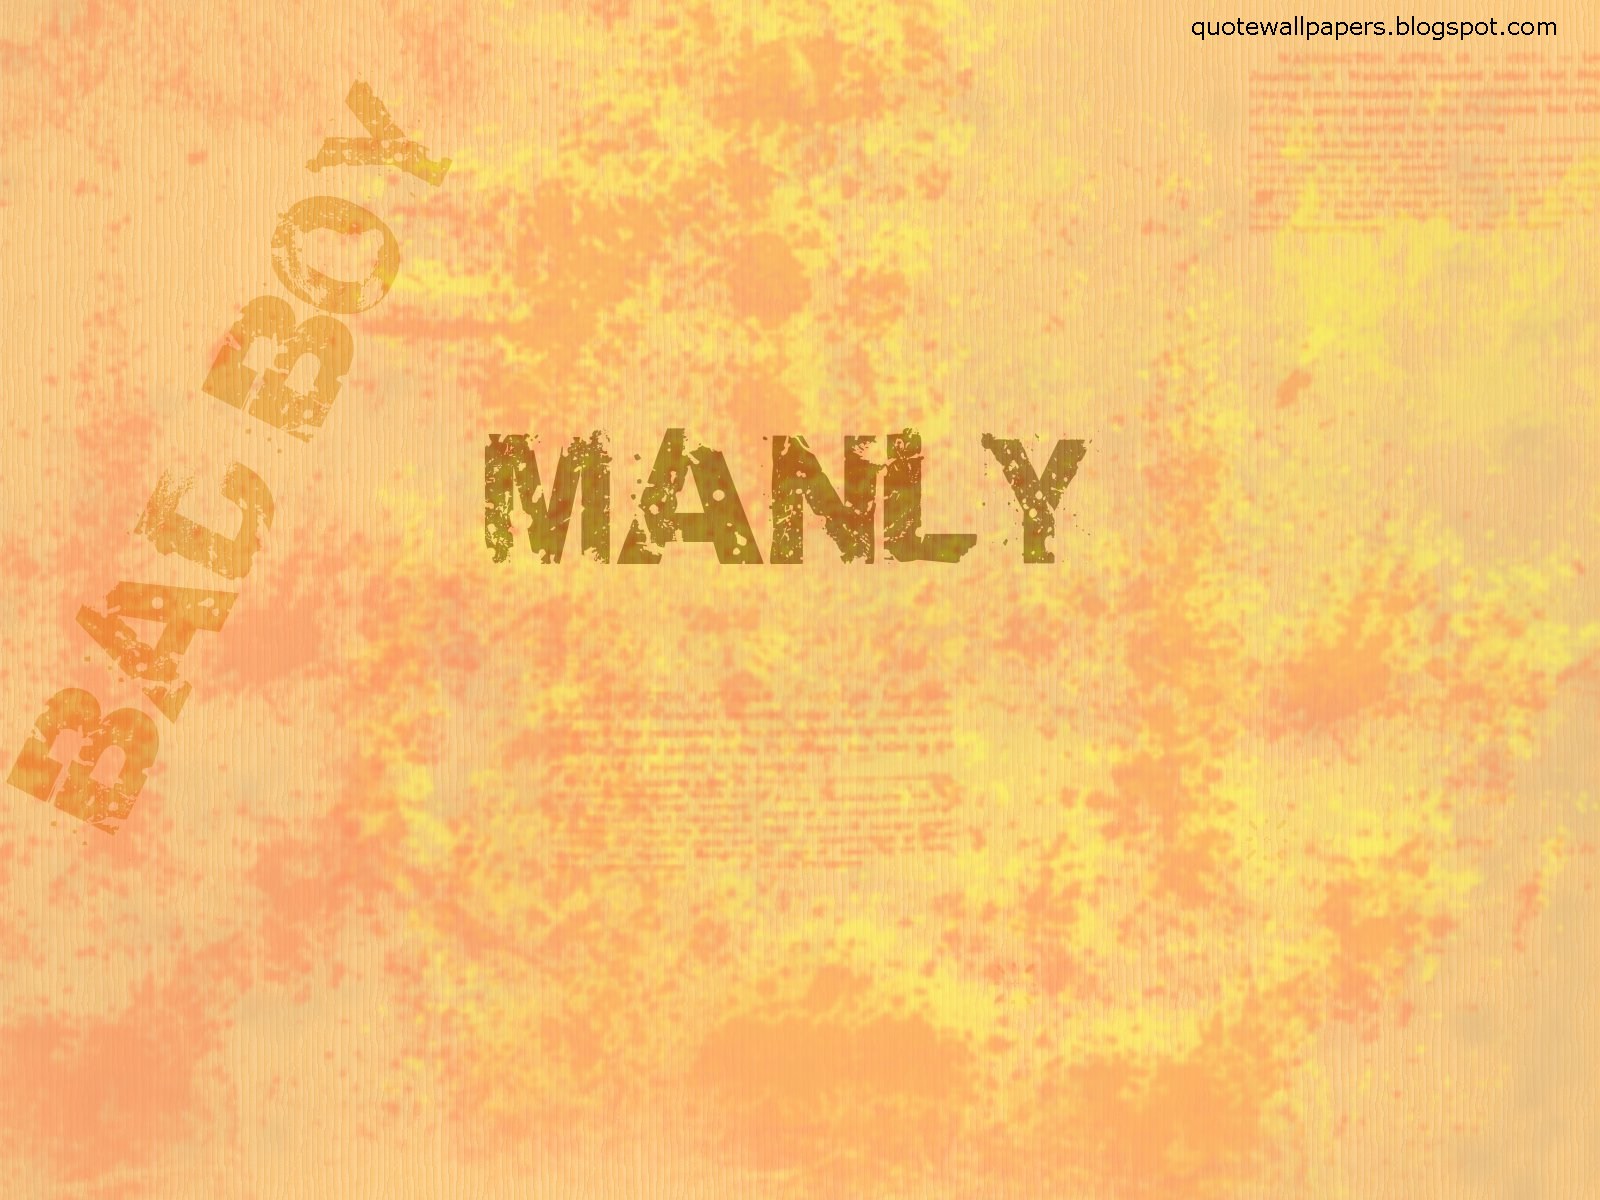 Manly Badboy - Calligraphy , HD Wallpaper & Backgrounds